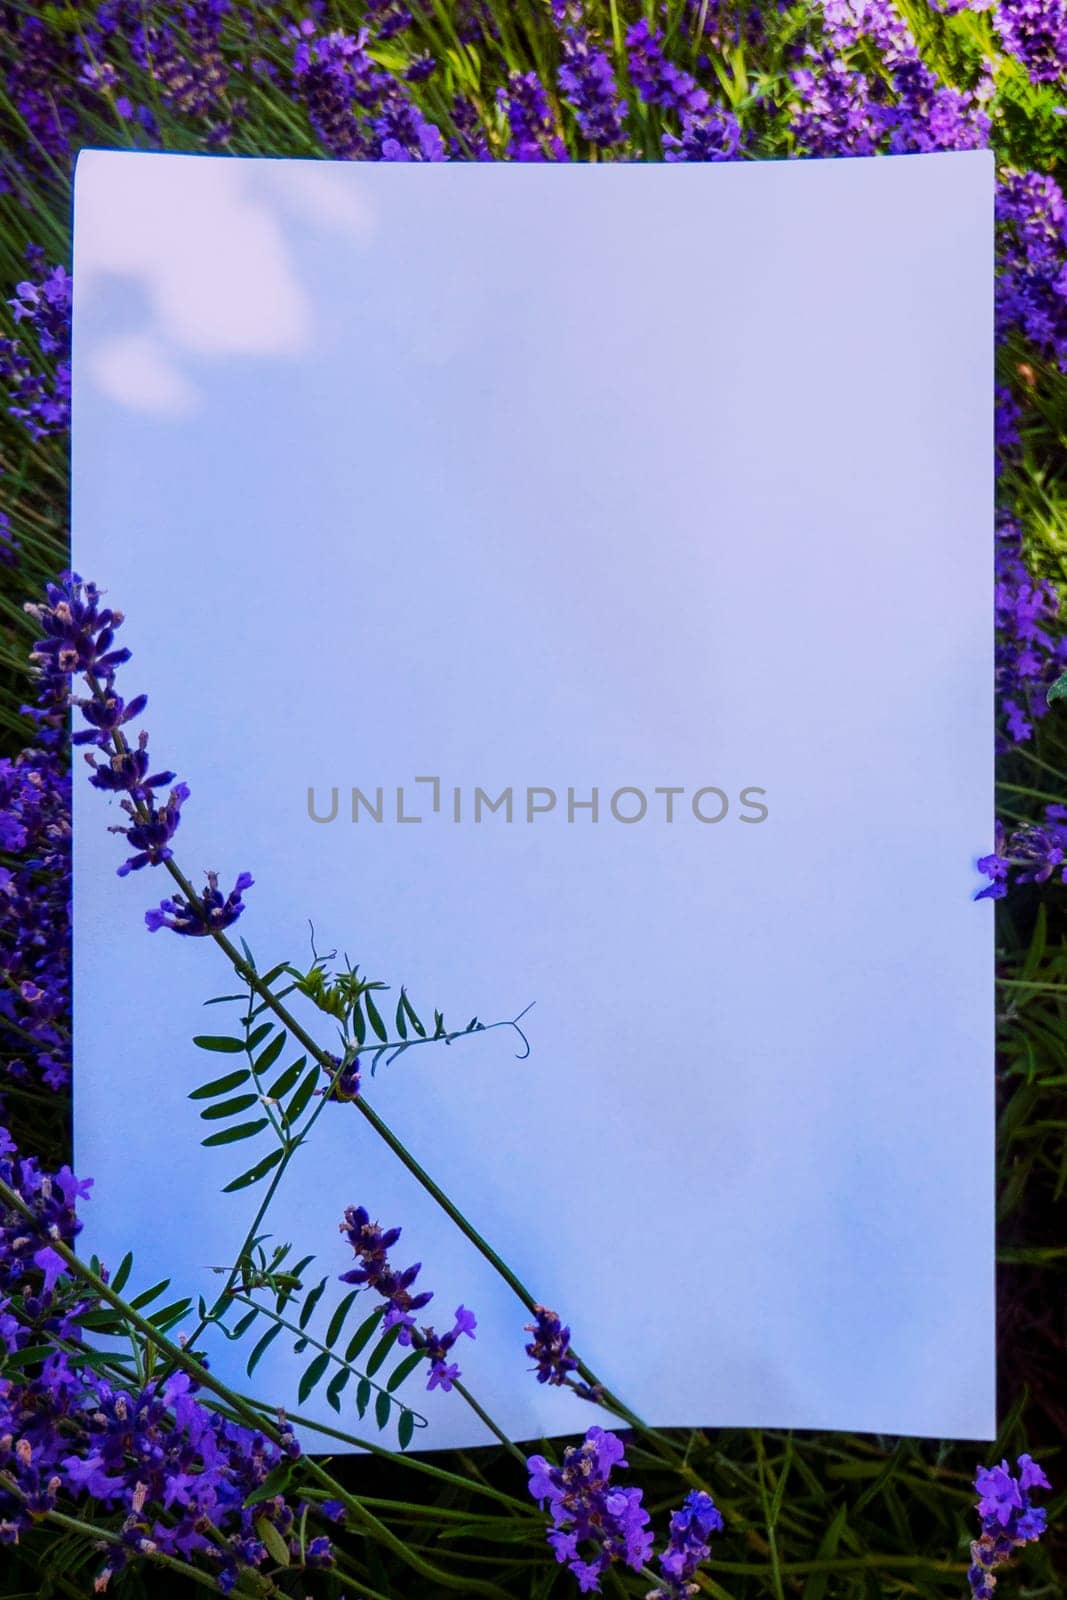 A beautiful branch of lavender lies on a white background by kajasja